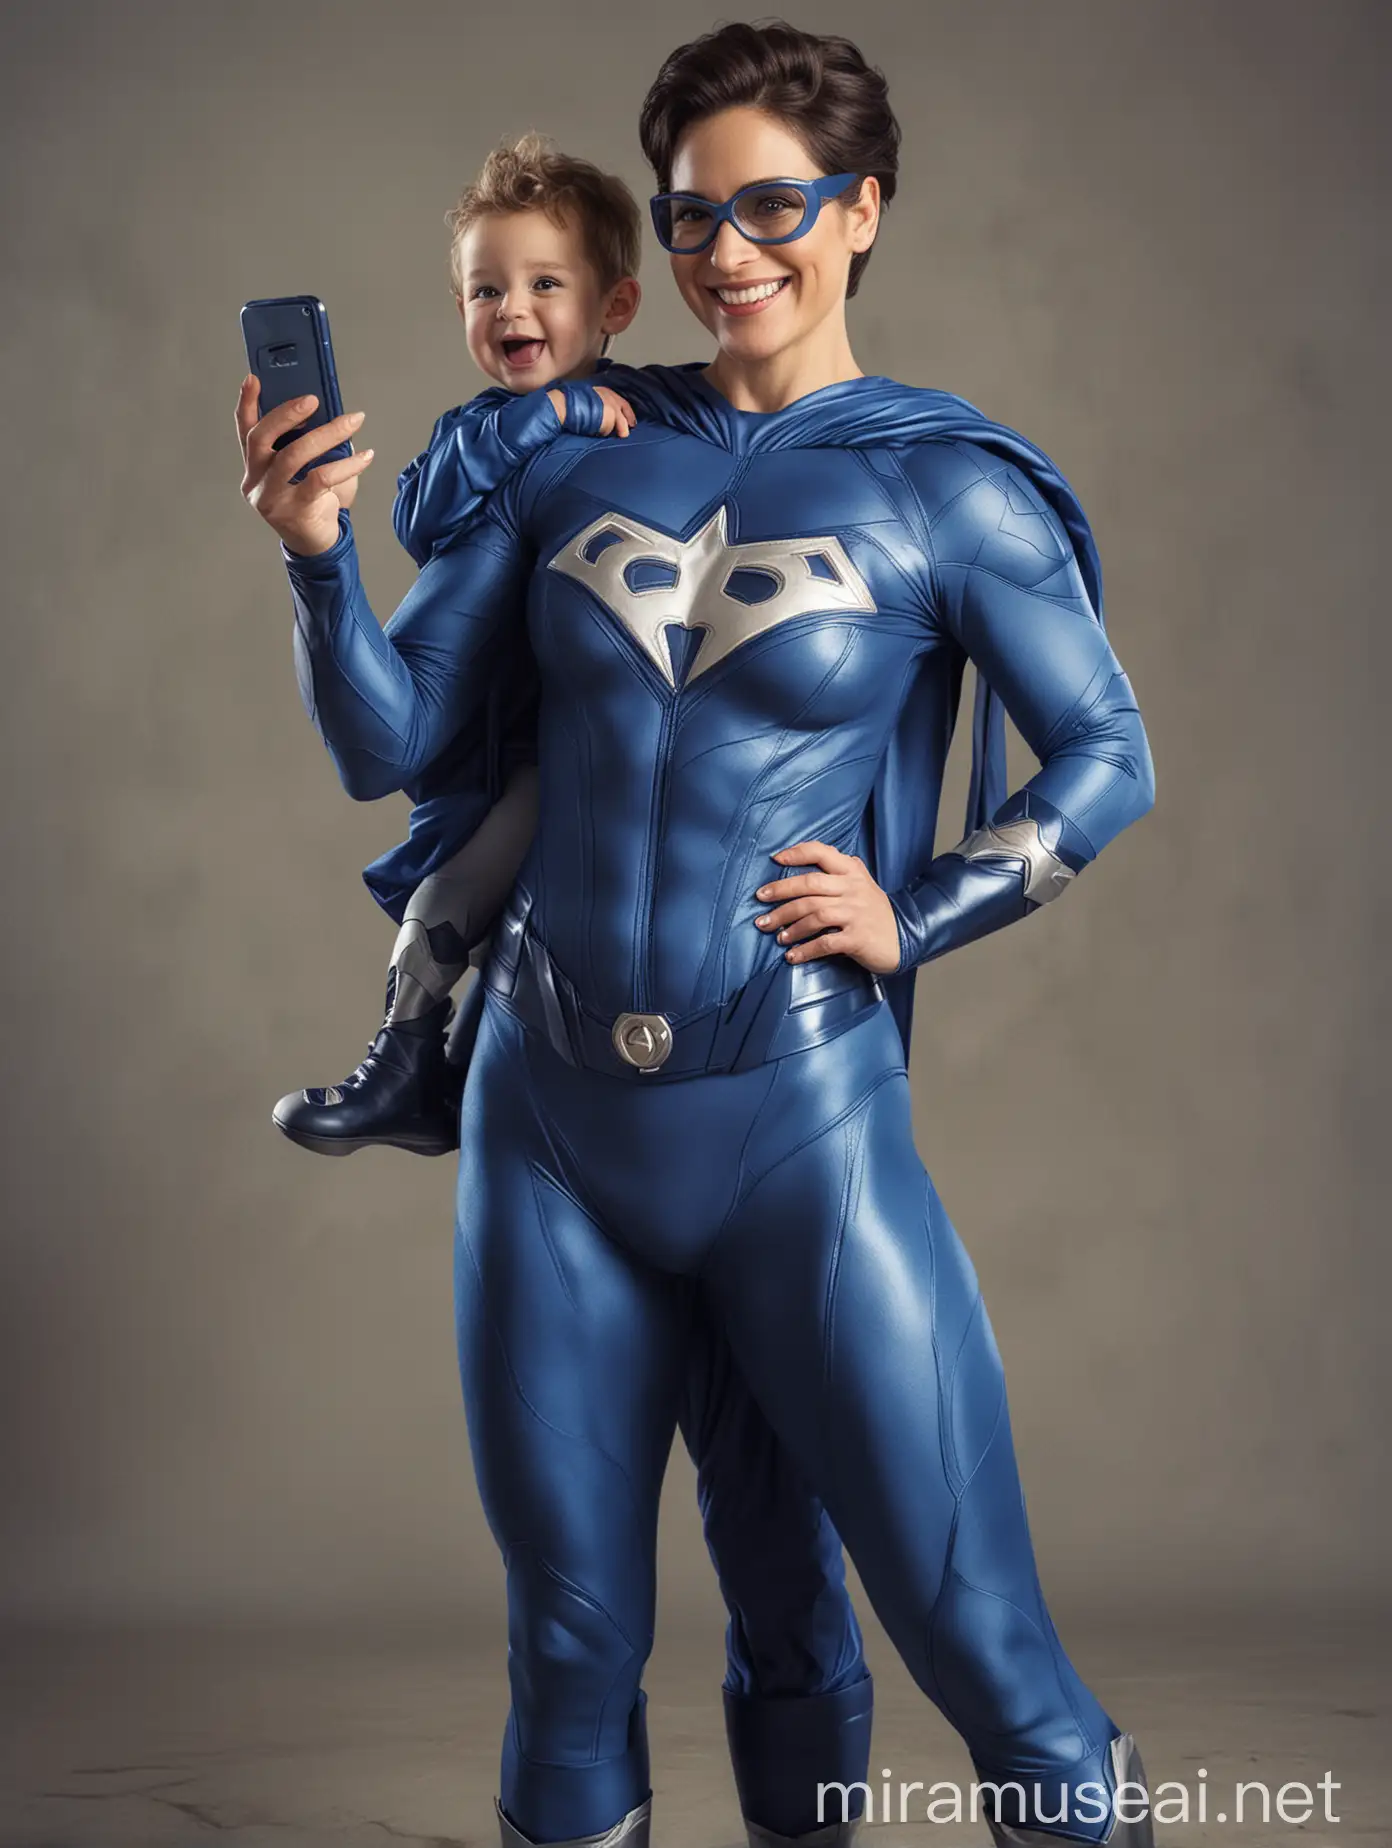 Smiling Mother and Son Blue Superhero Costume Fun